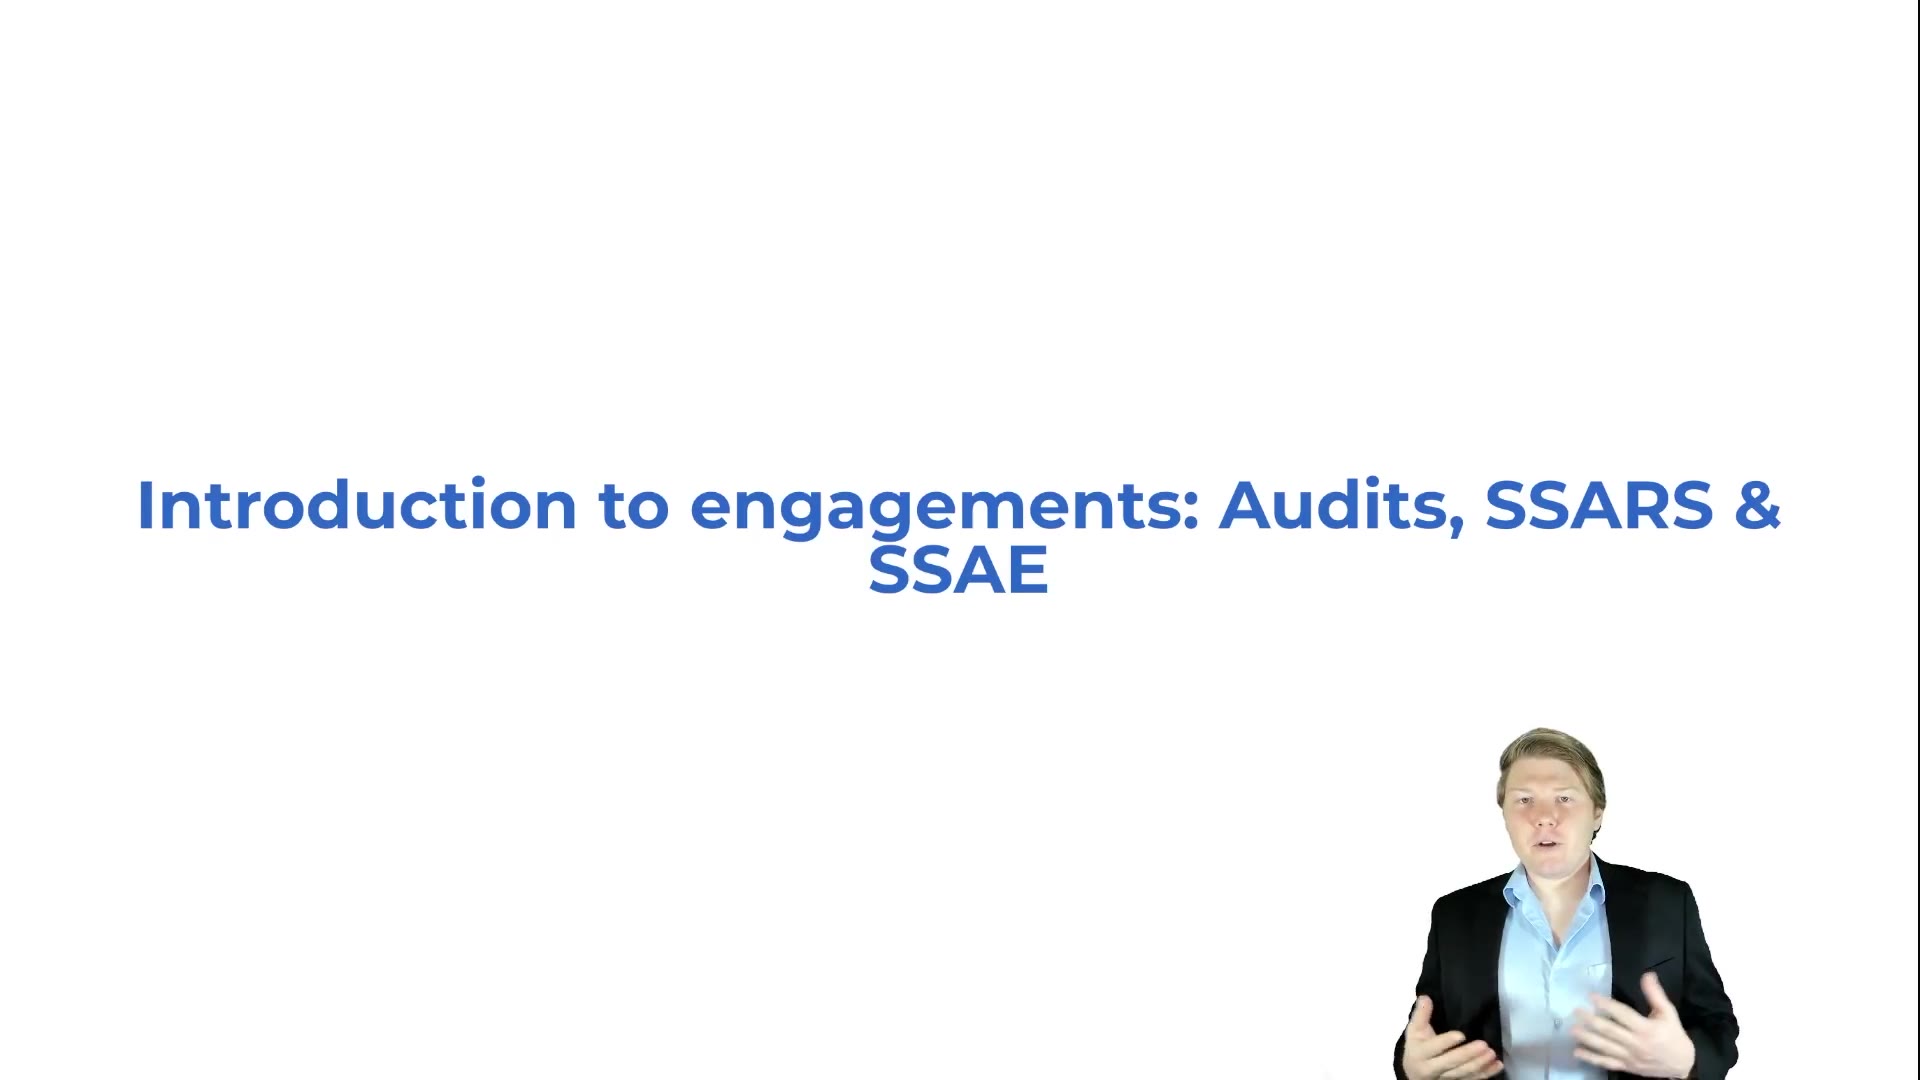 Introduction to Engagements: Audits, SSARS & SSAE Overview lesson thumbnail